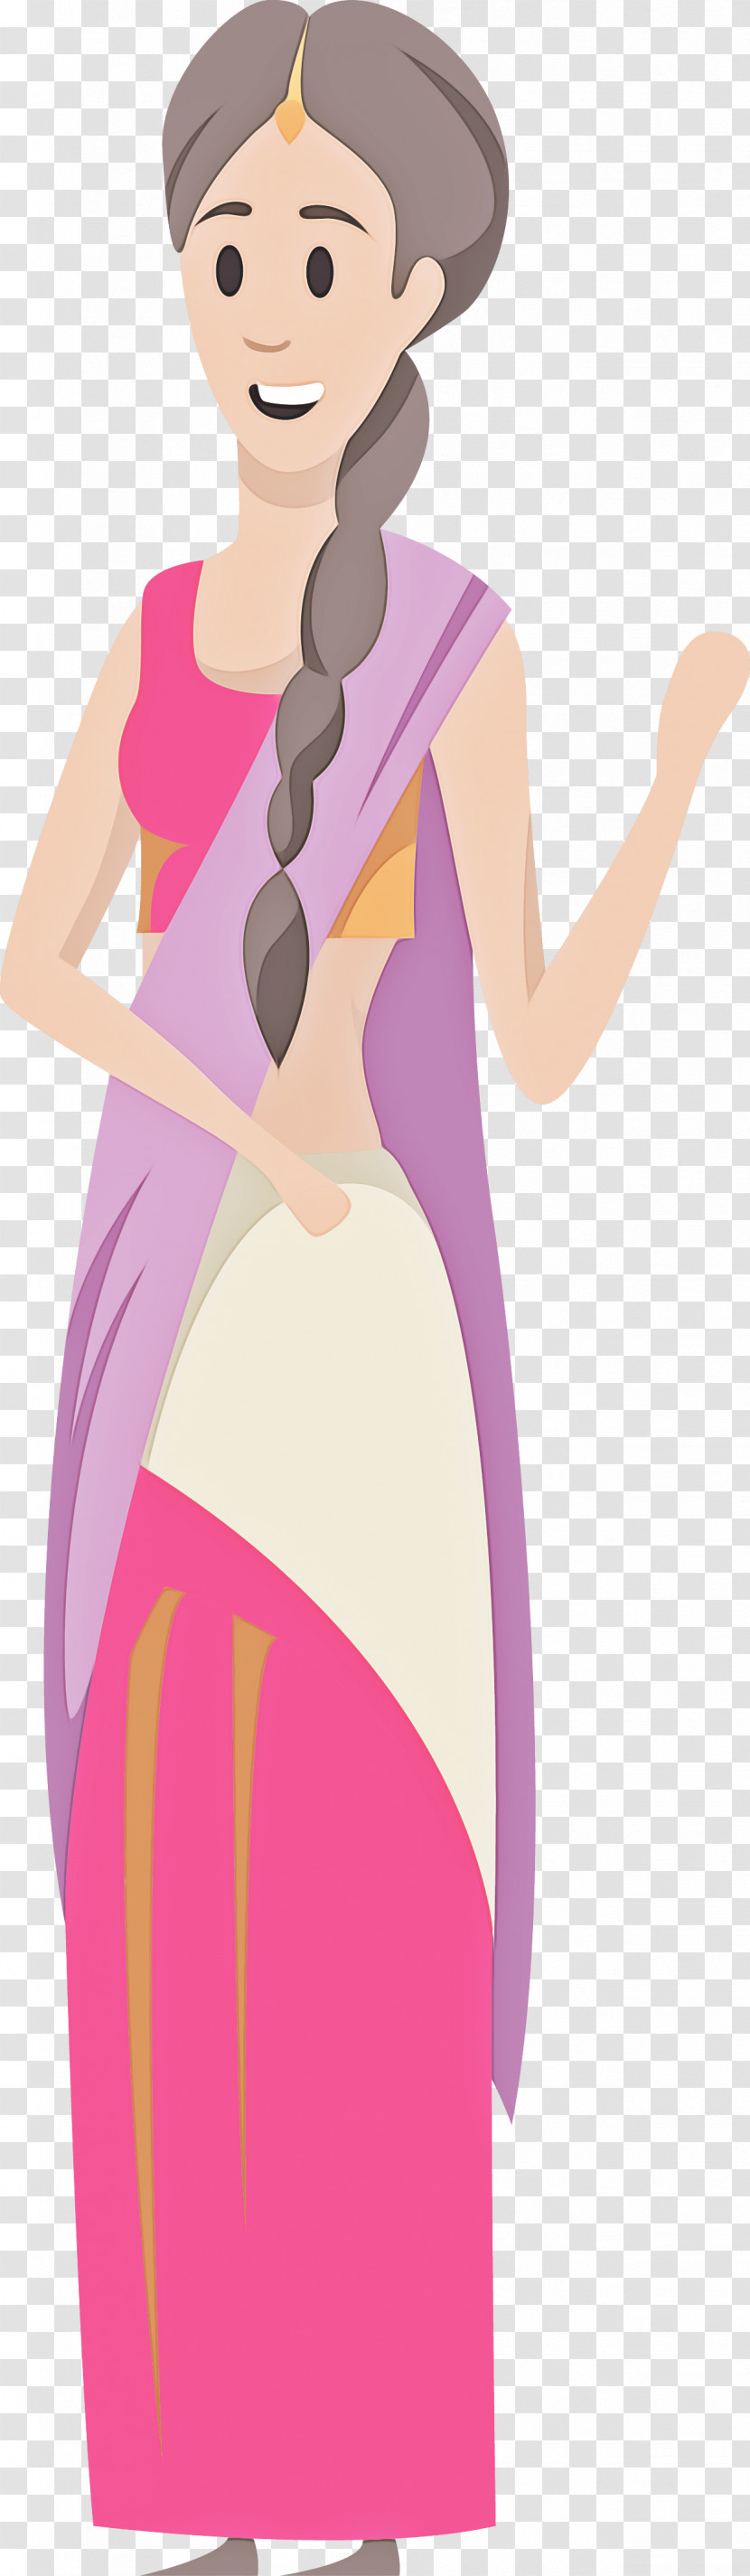 Clothing Character Pink M Beauty.m Transparent PNG